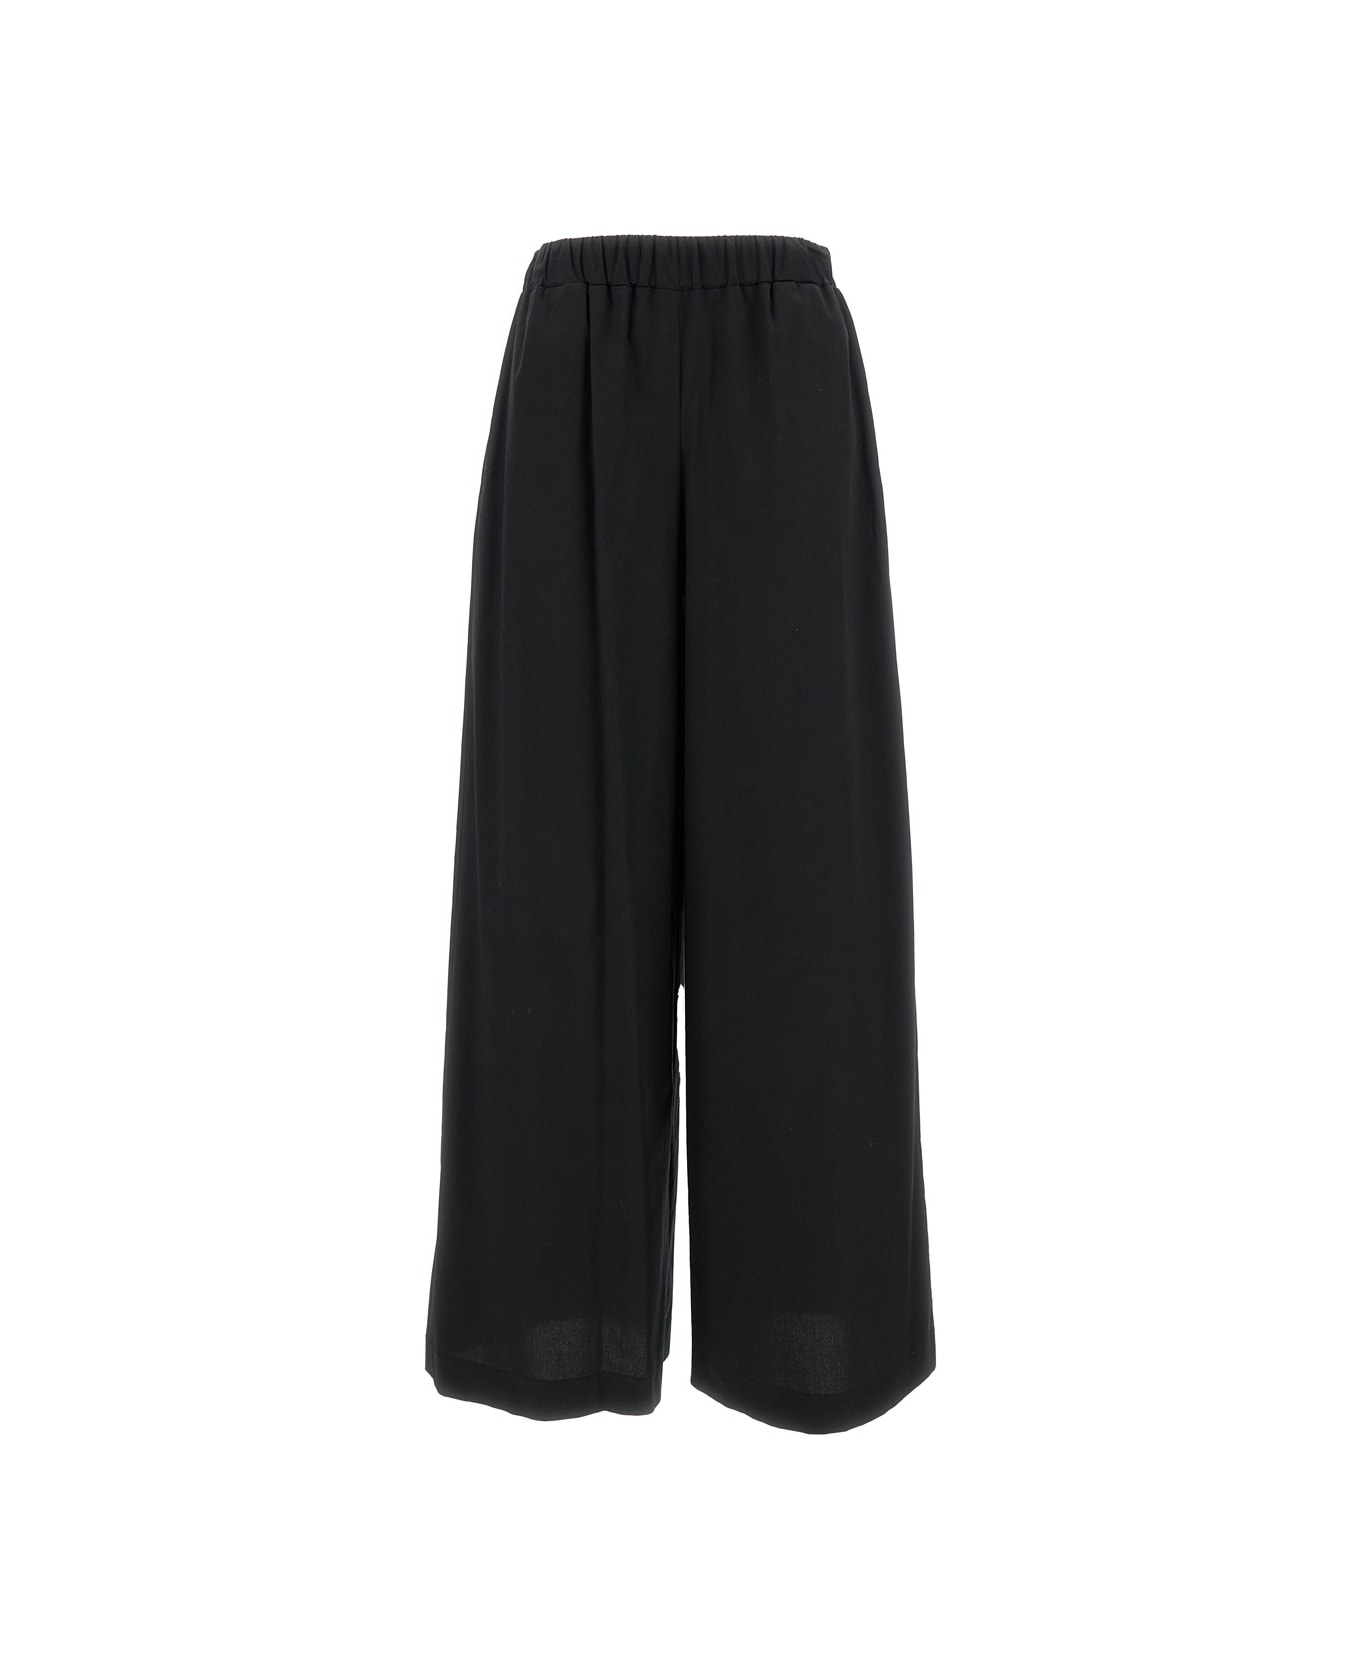 Federica Tosi Black Elastic High-waisted Pants In Stretch Cotton Woman - Black ボトムス